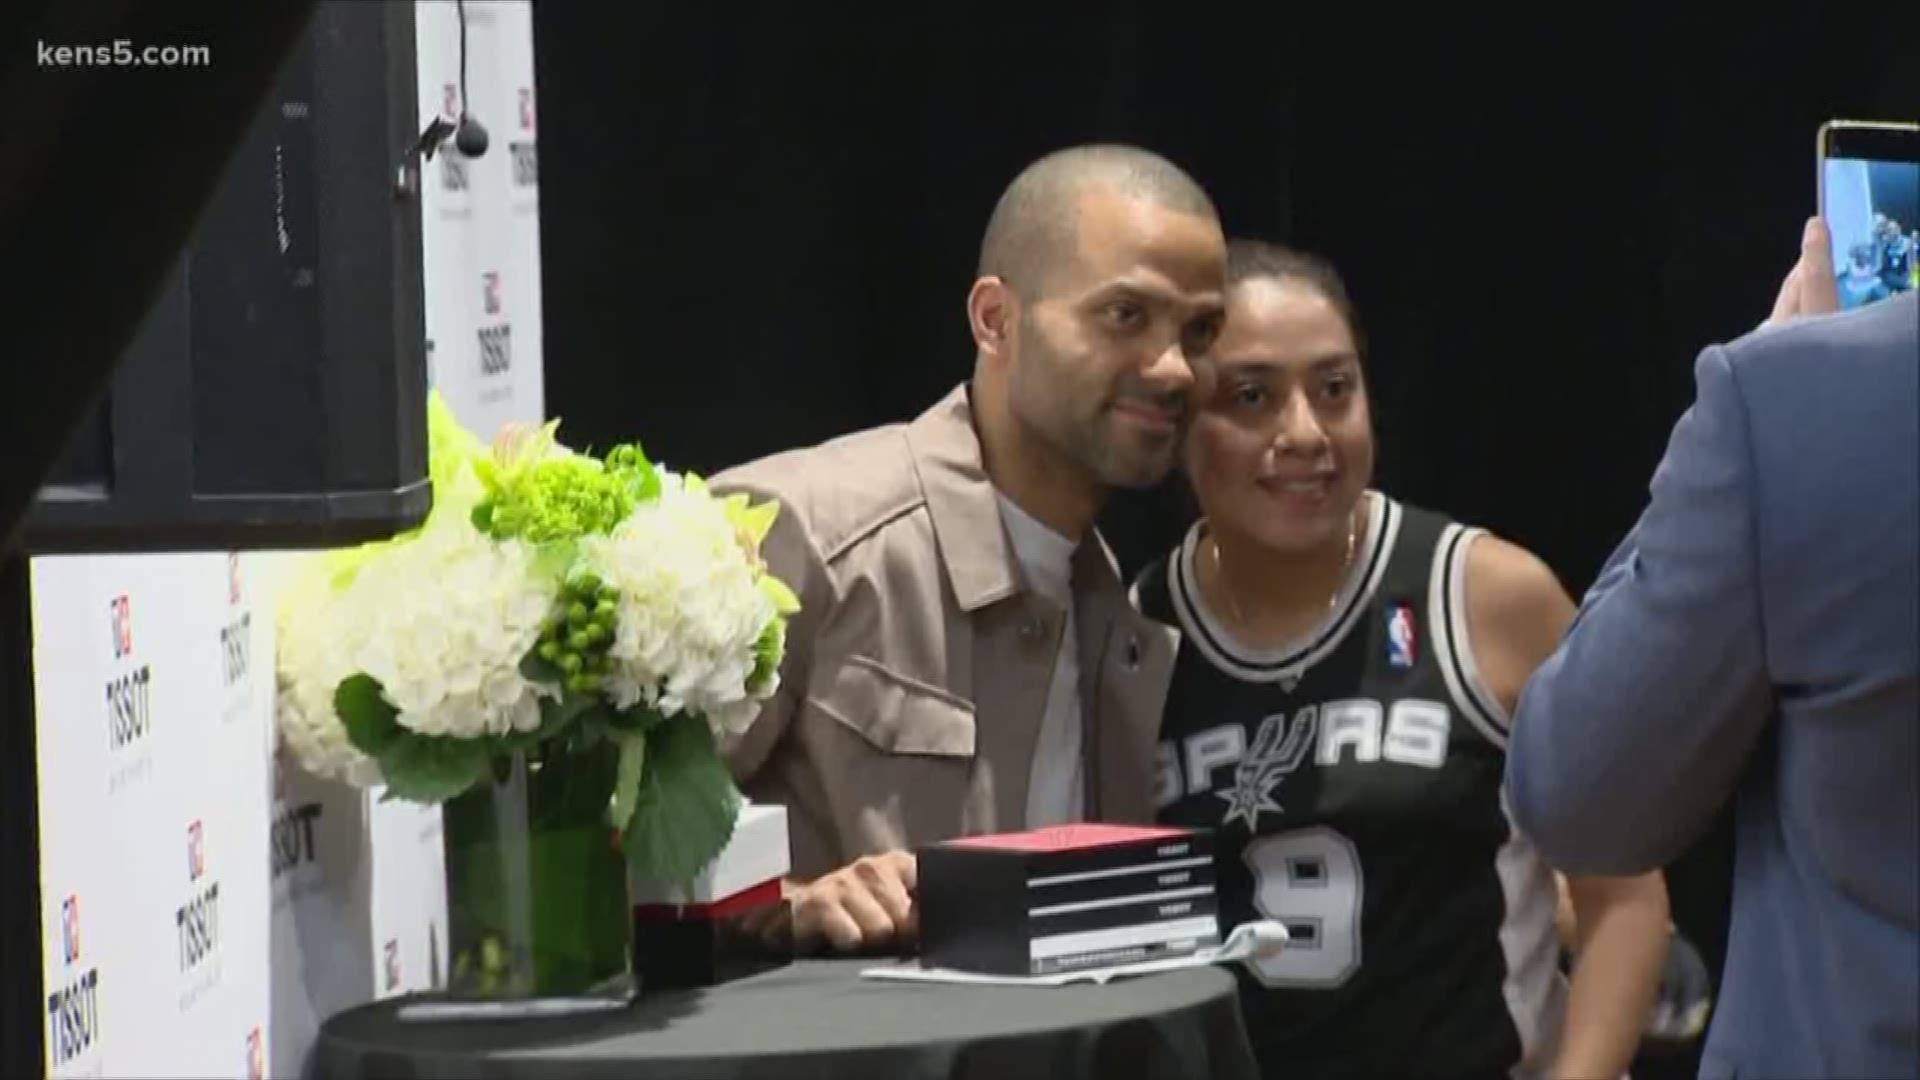 Saturday was Tony Parker Day in the Alamo City, providing fans with a chance to meet the Spurs legend.